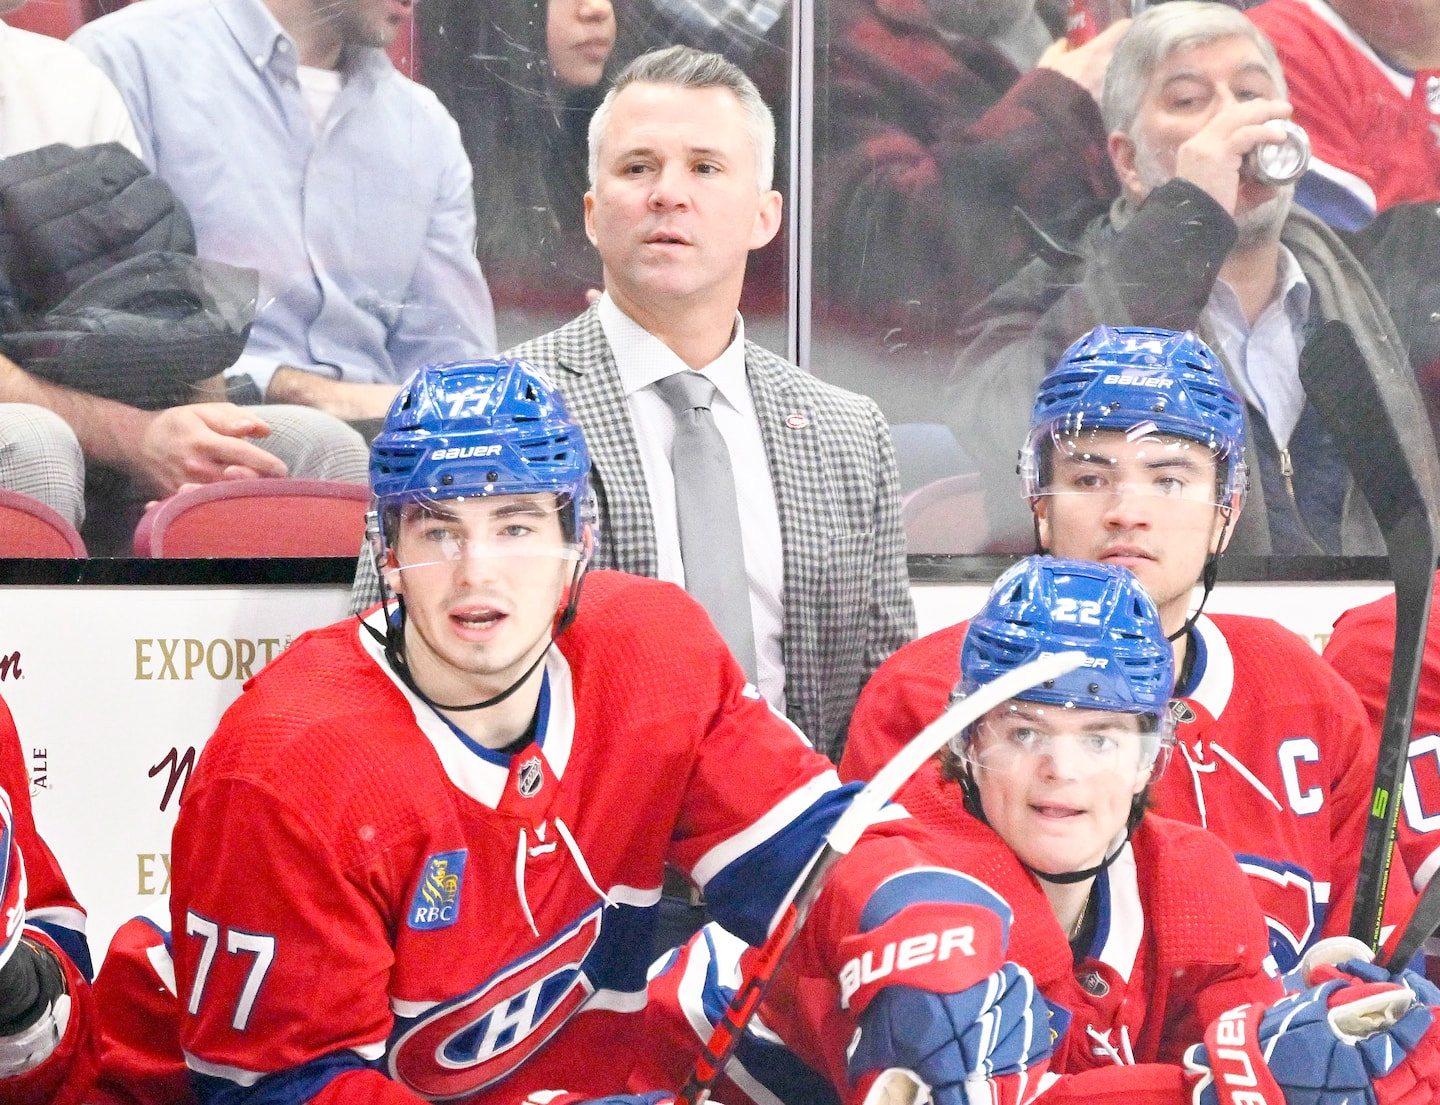 “We are too easy to face” says Martin St-Louis